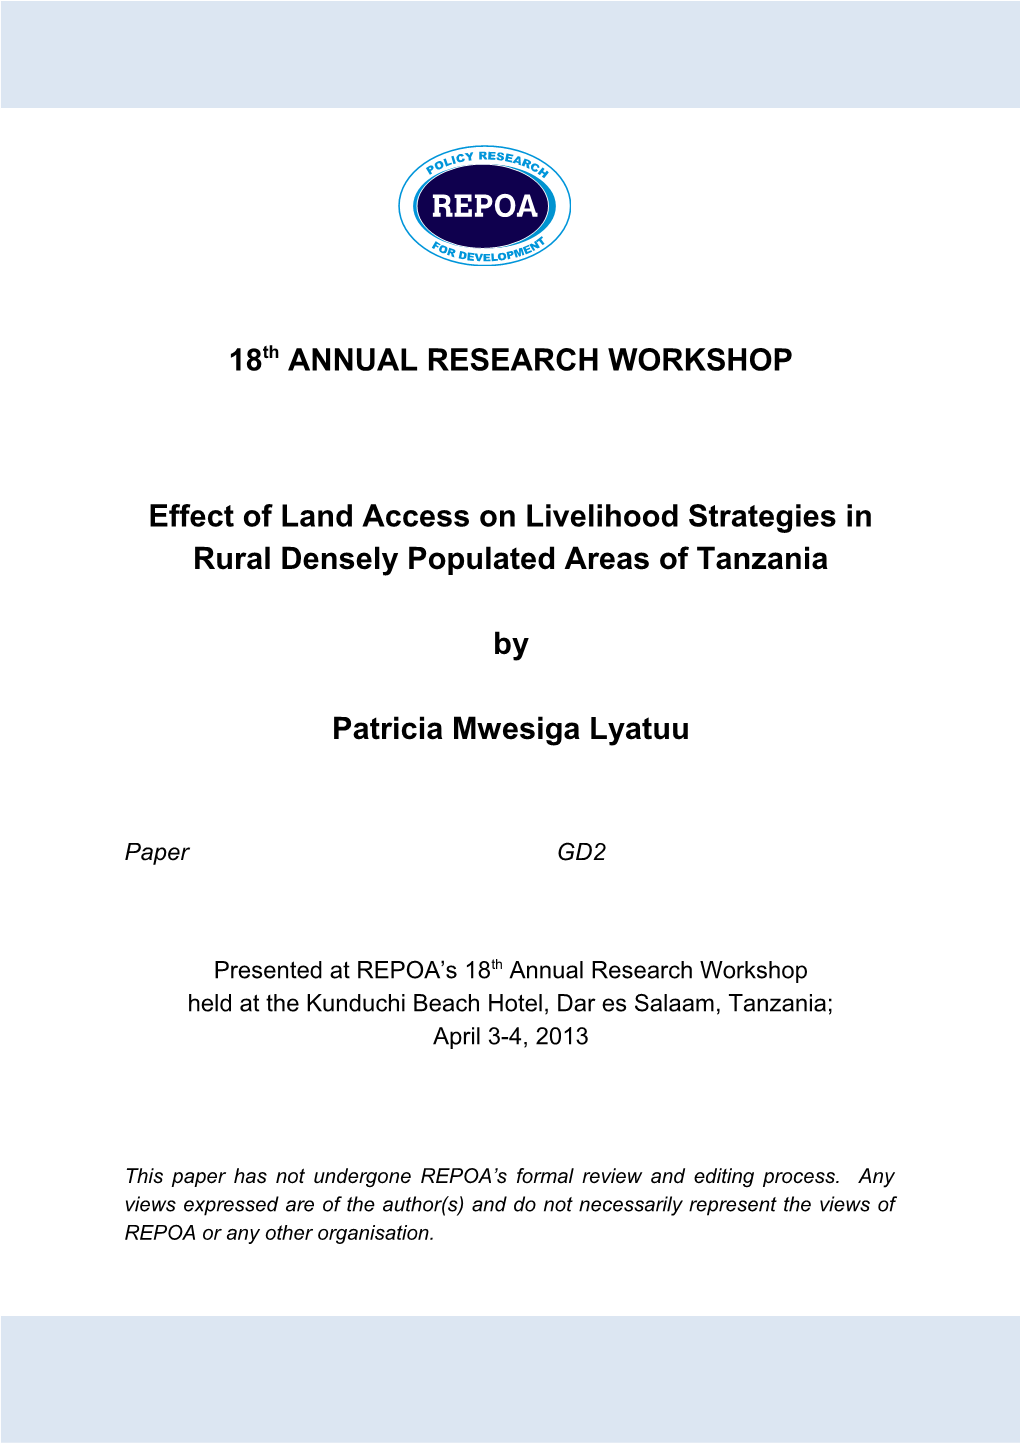 Effect of Land Access on Livelihood Strategies in Rural Densely Populated Areas of Tanzania